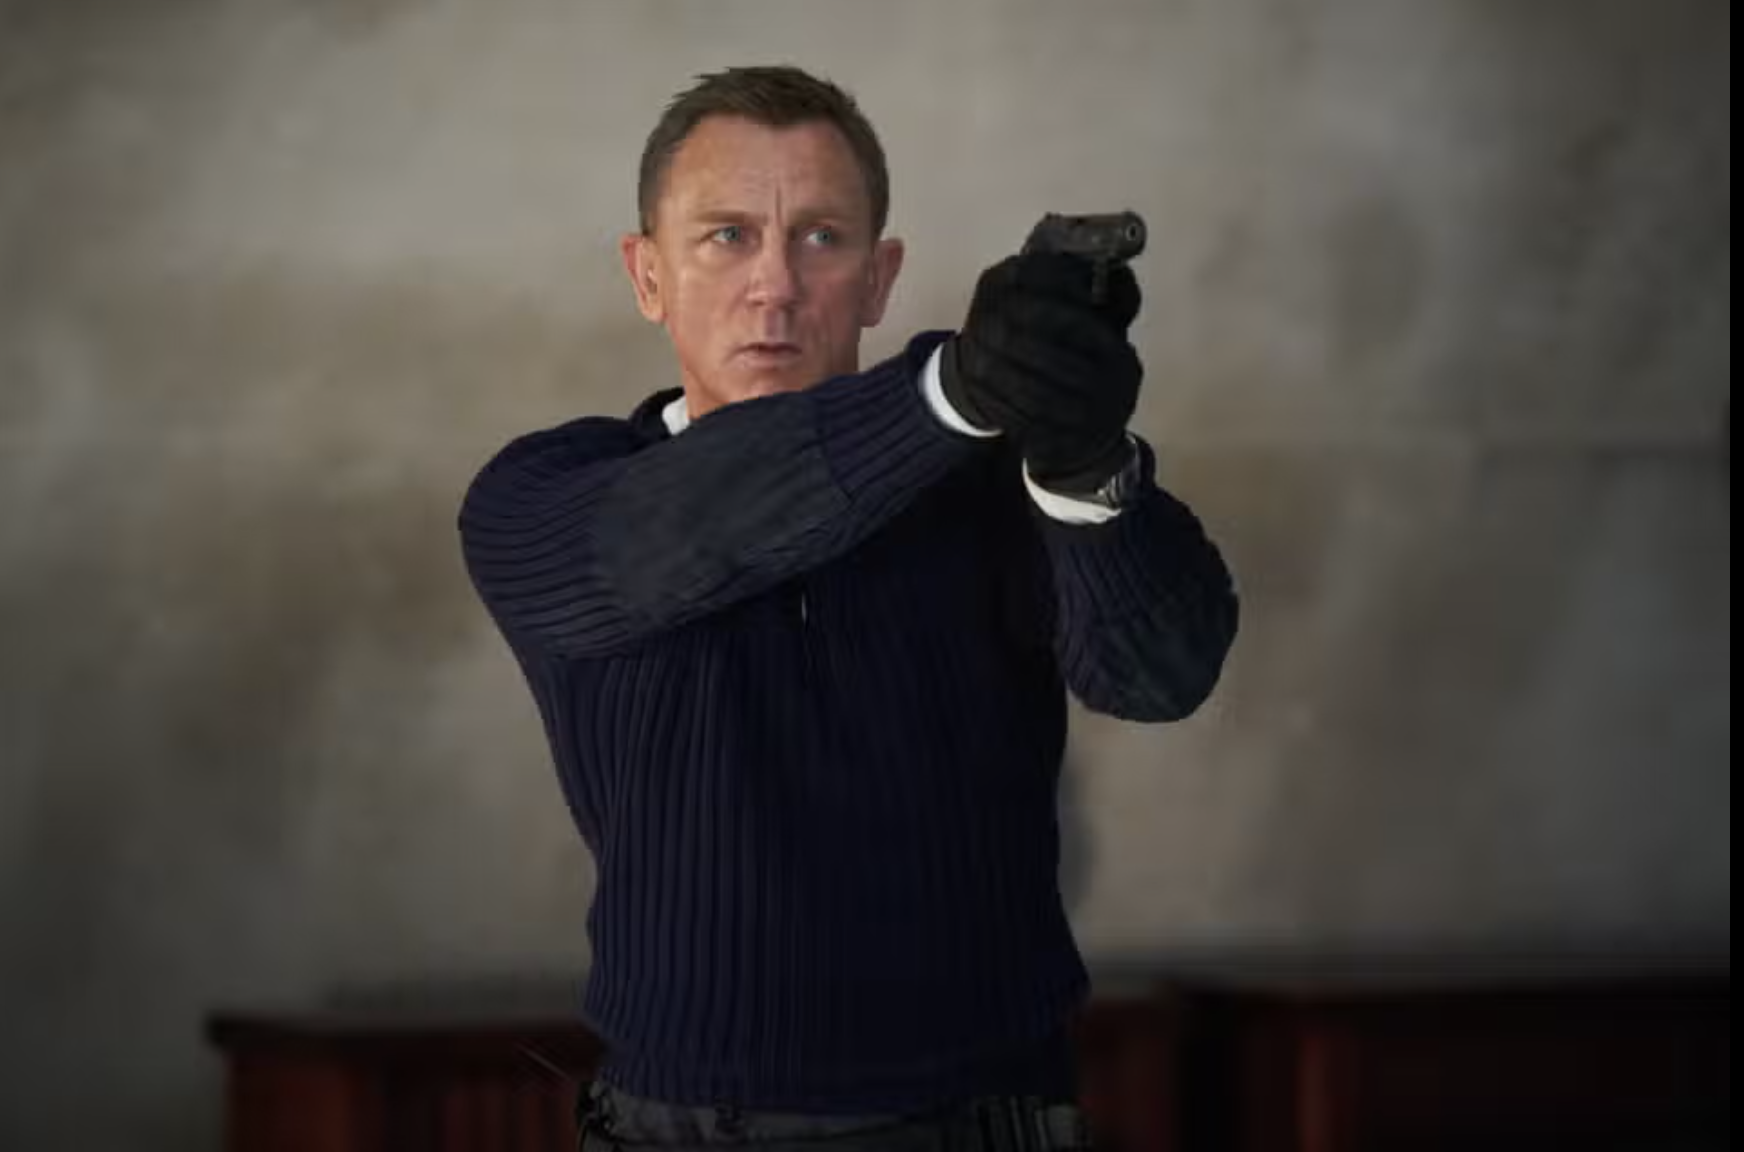 Hollywood’s Biggest Name ‘In Running To Play James Bond’